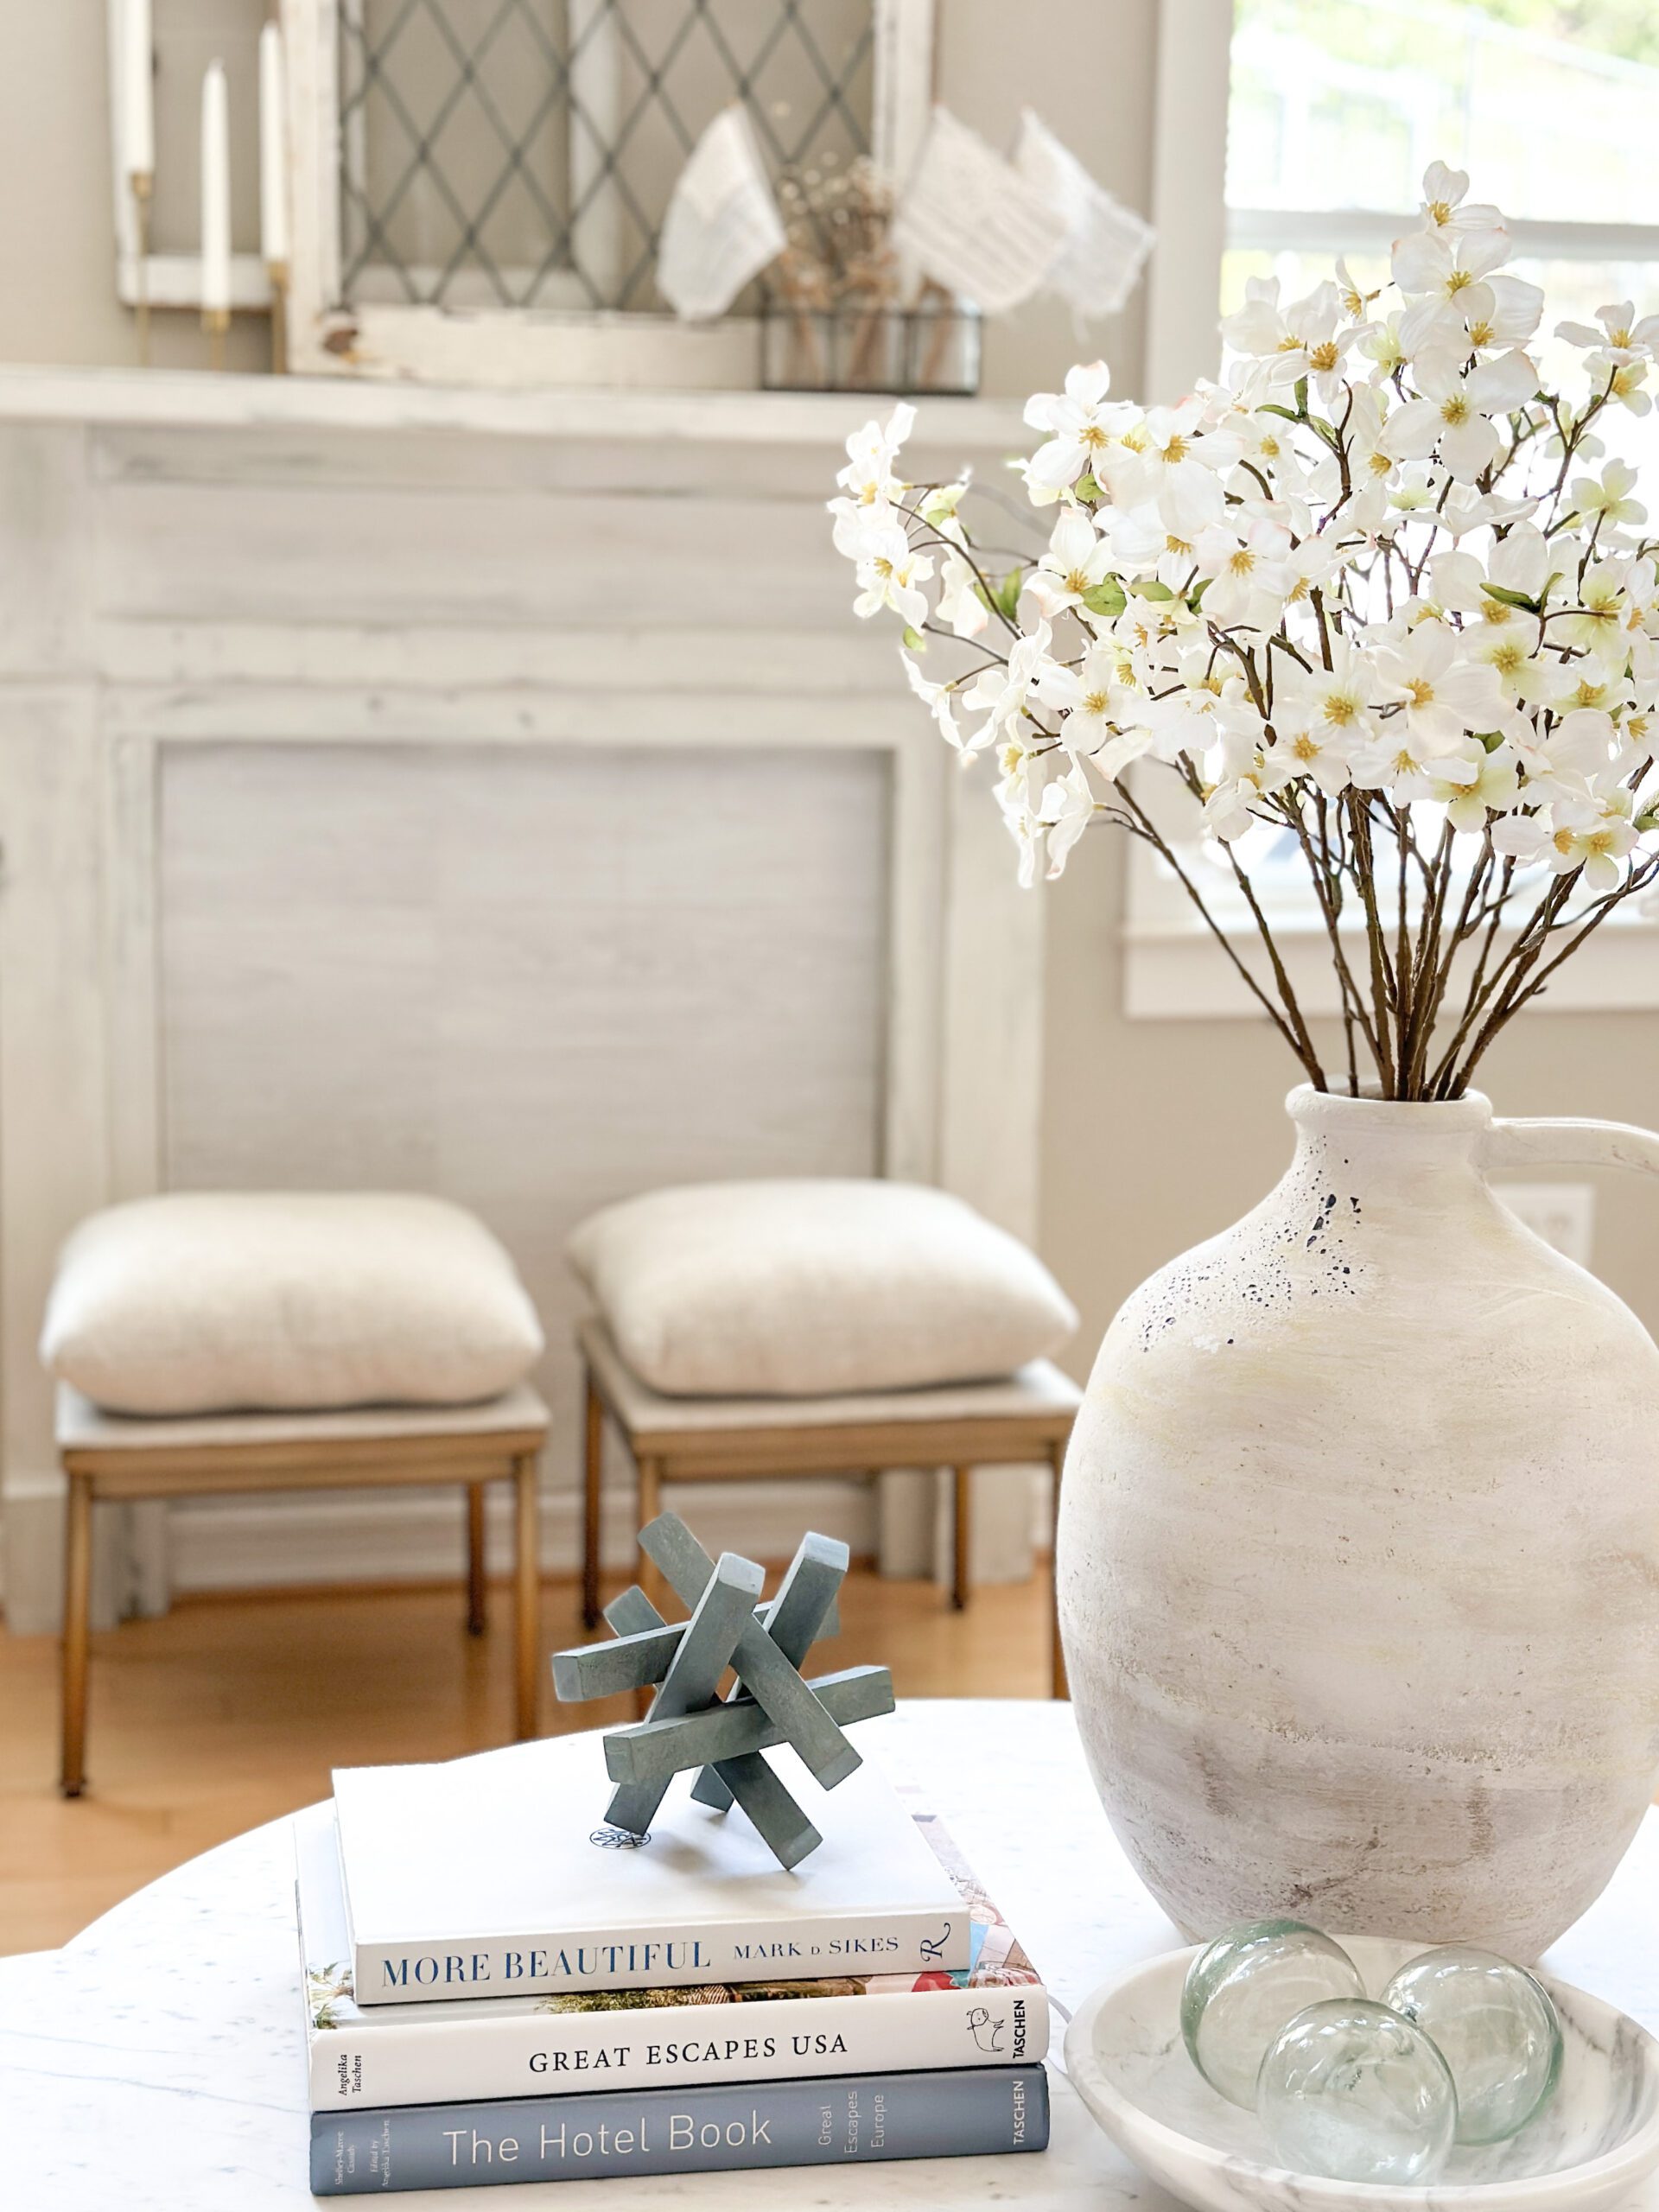 7 Tips For Making Faux flowers Look Real - StoneGable